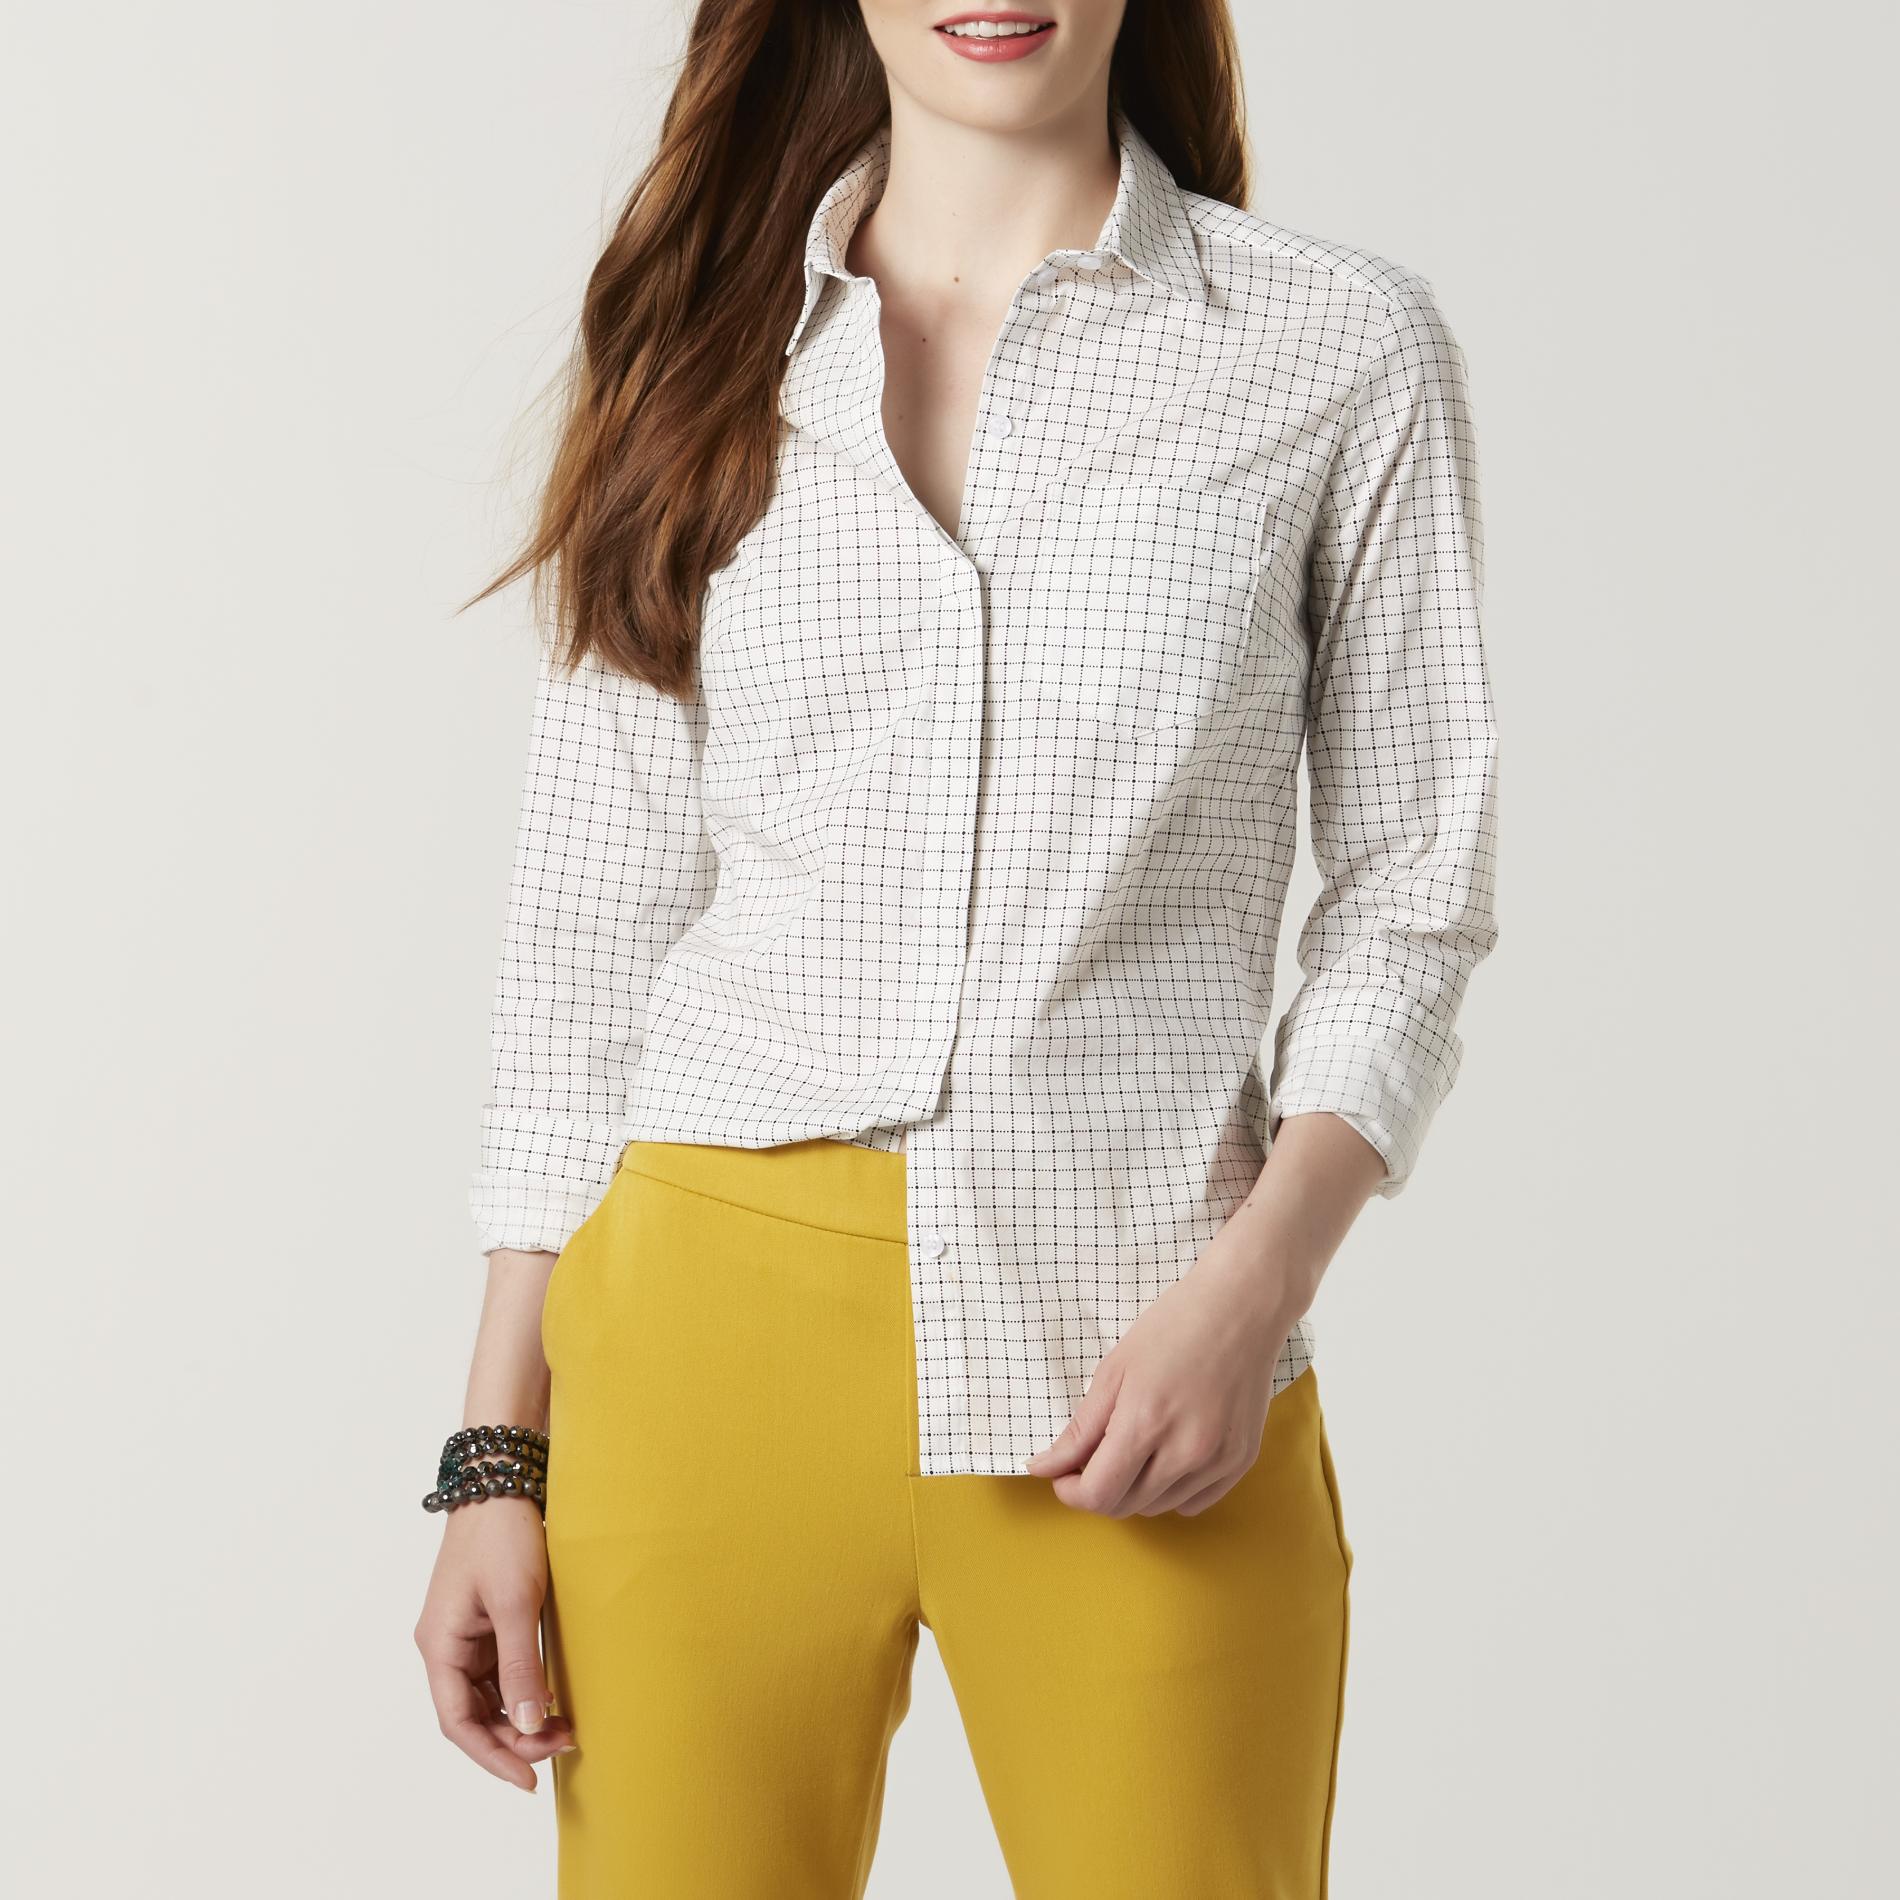 Simply Styled Women's Blouse - Checkered